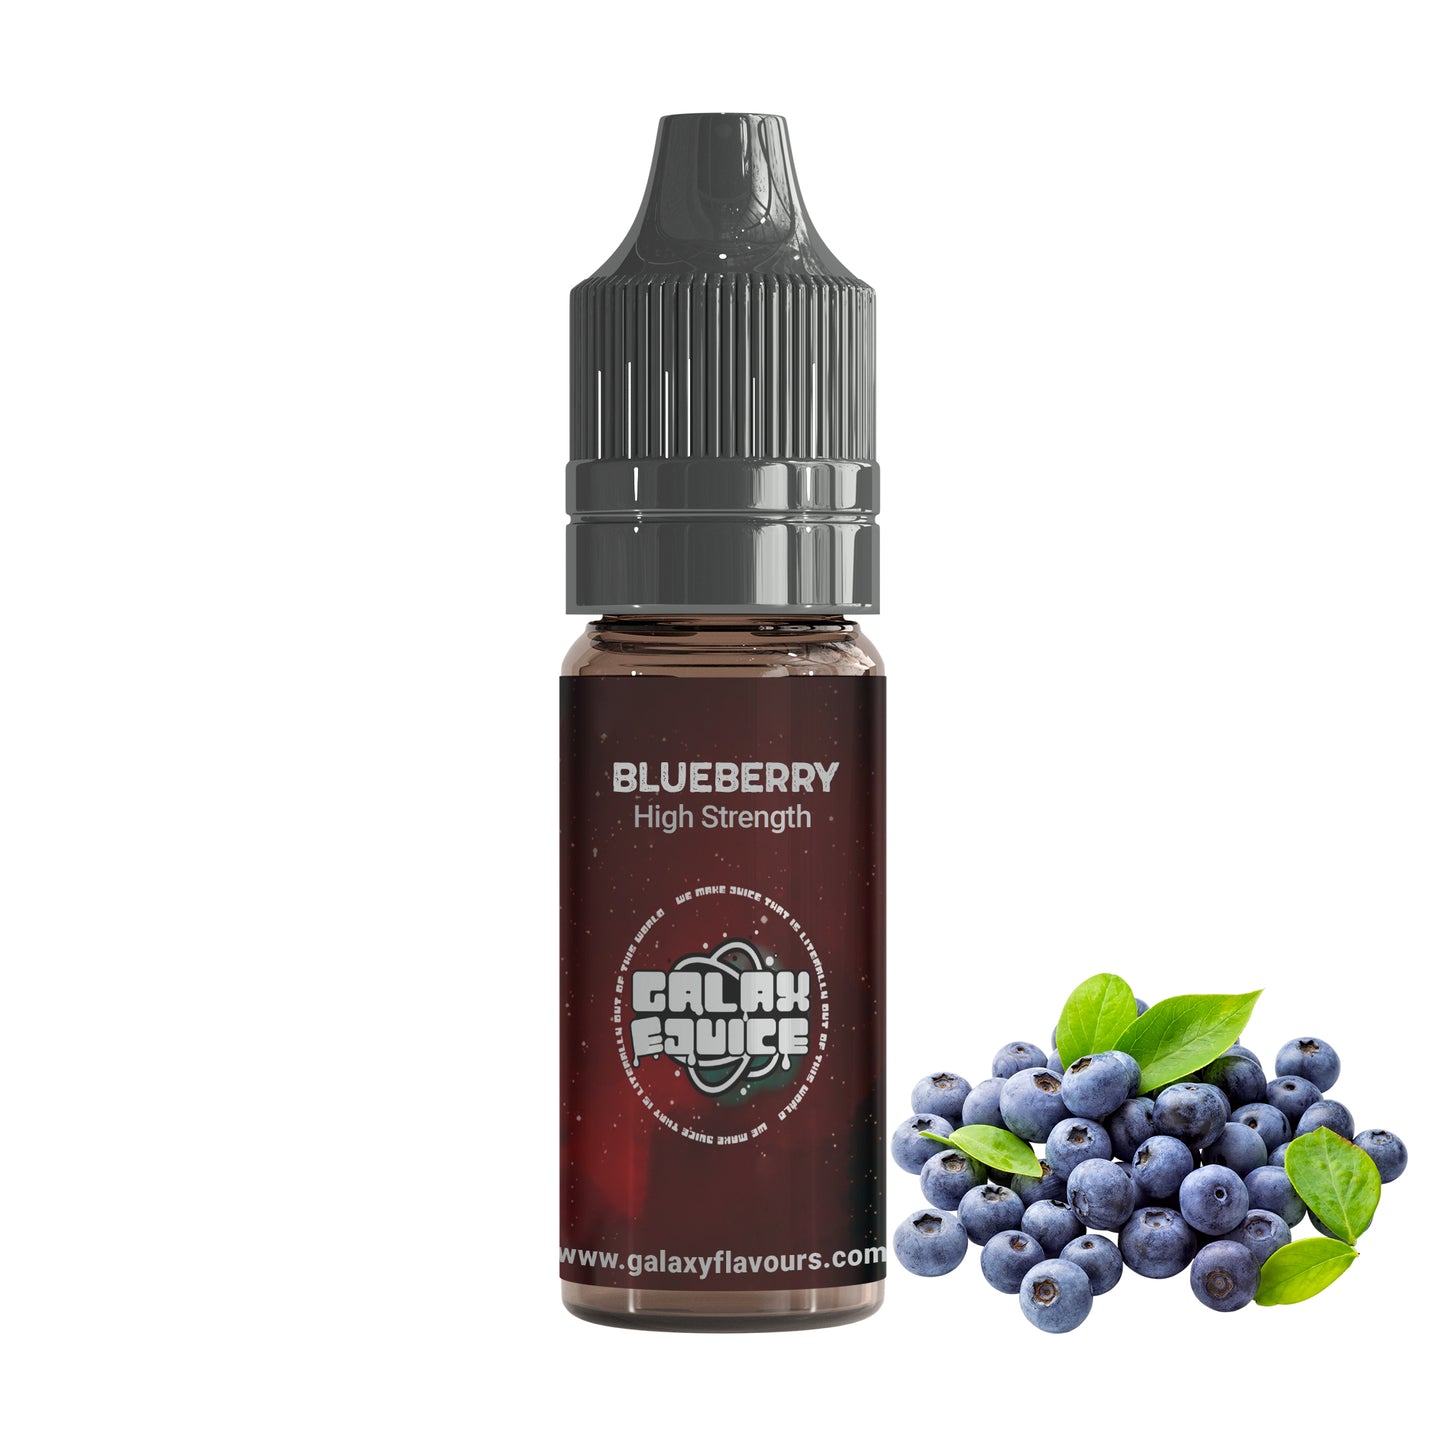 Blueberry High Strength Professional Flavouring.